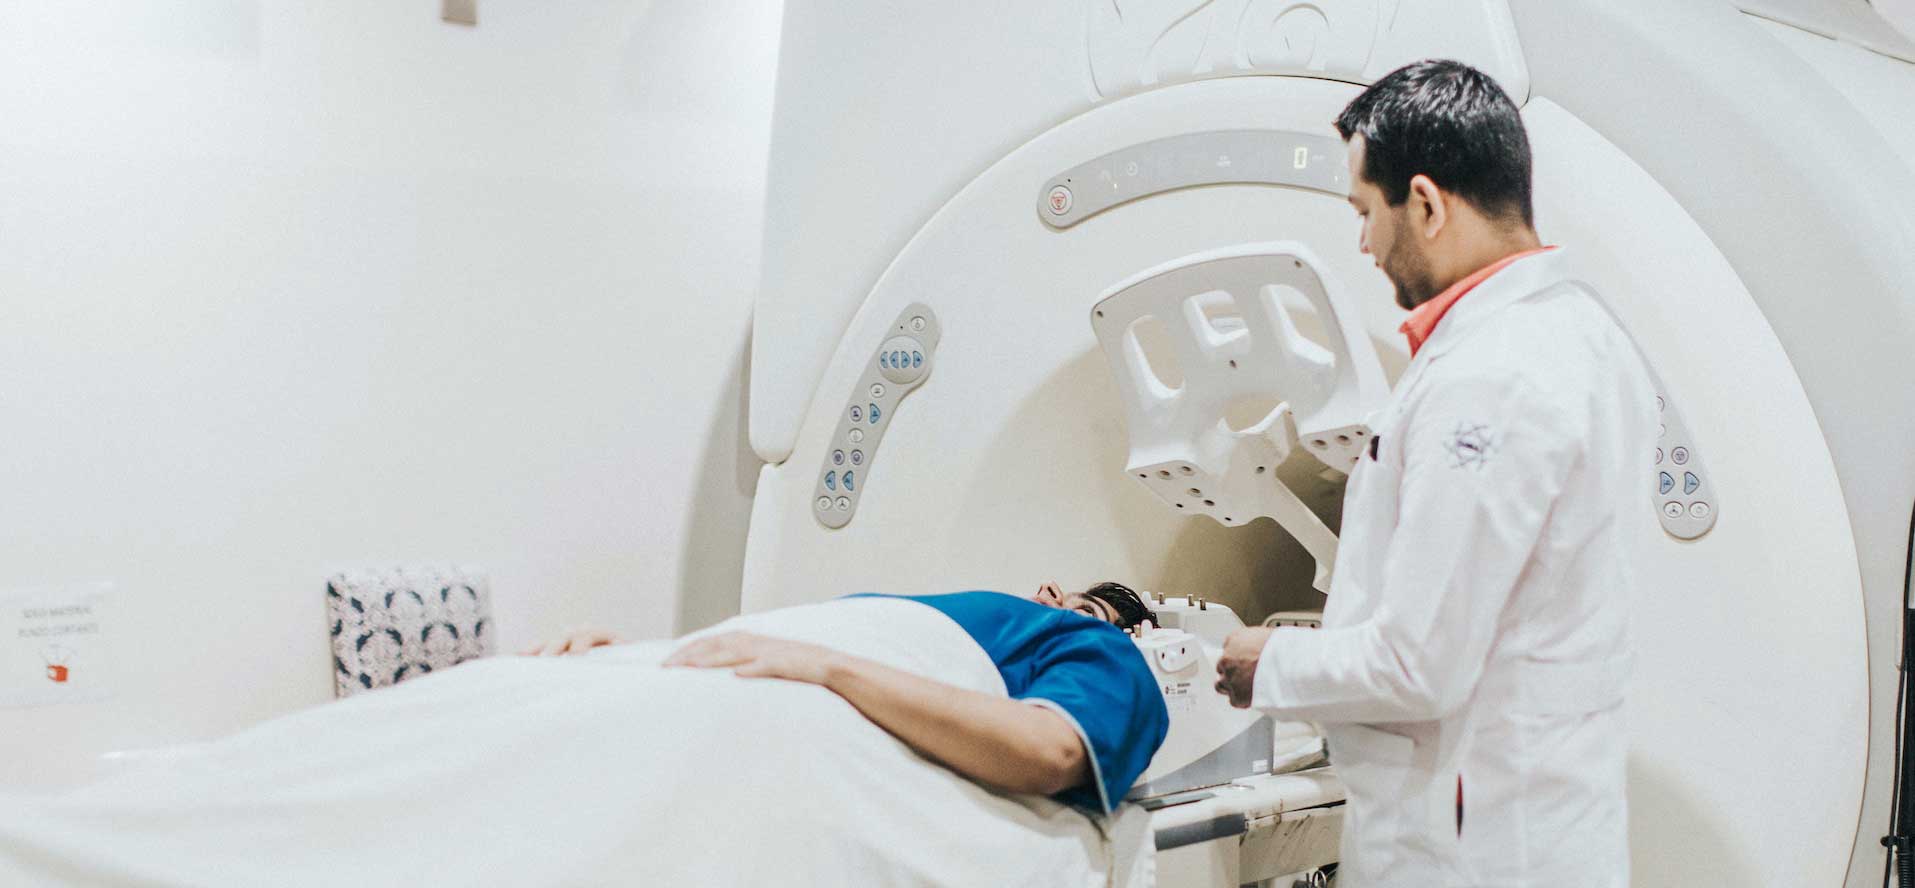 A patient attended by a physician is about to undergo diagnostic imaging.